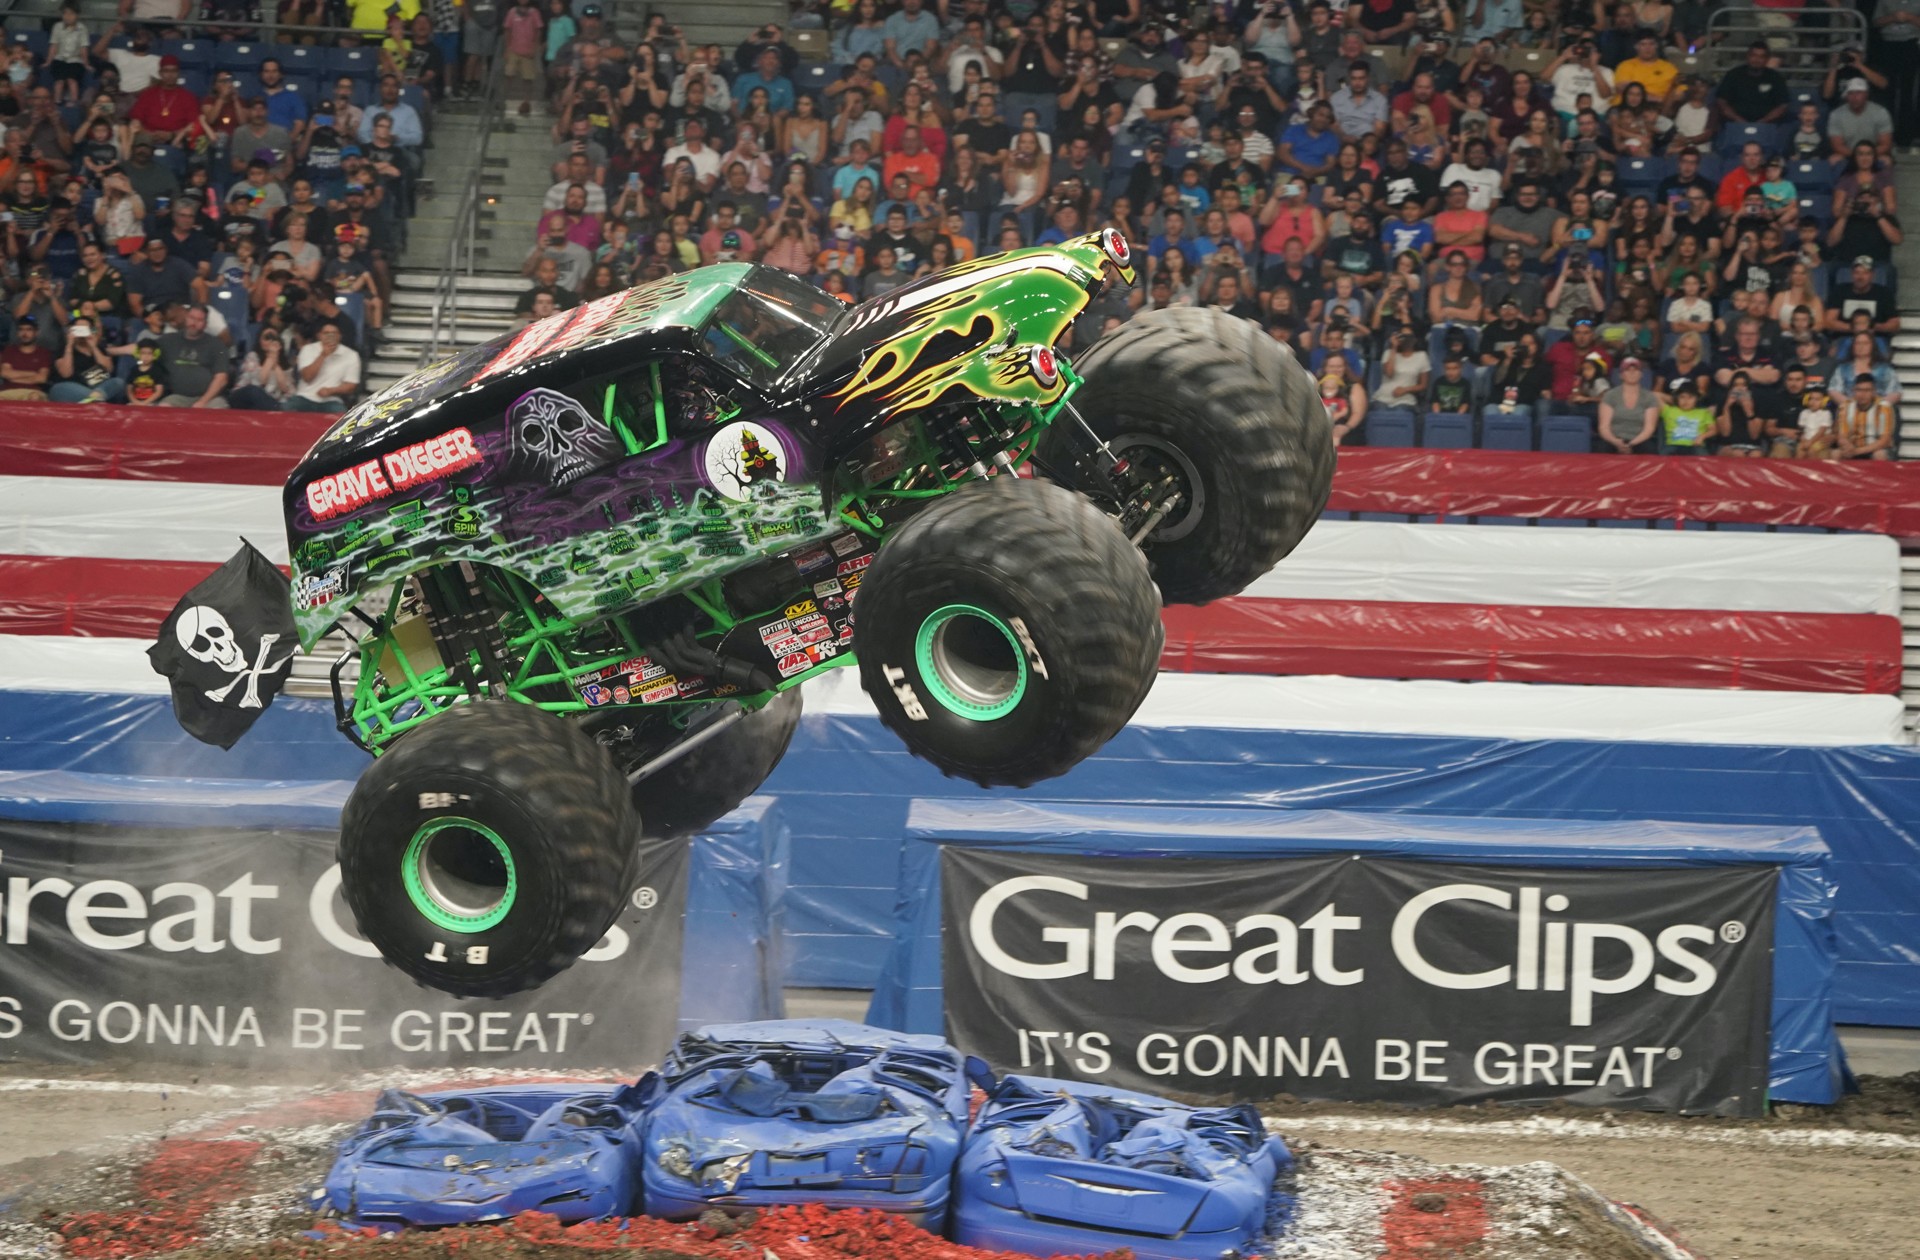 Monster Jam truck rally coming to San Antonio for Fourth of July